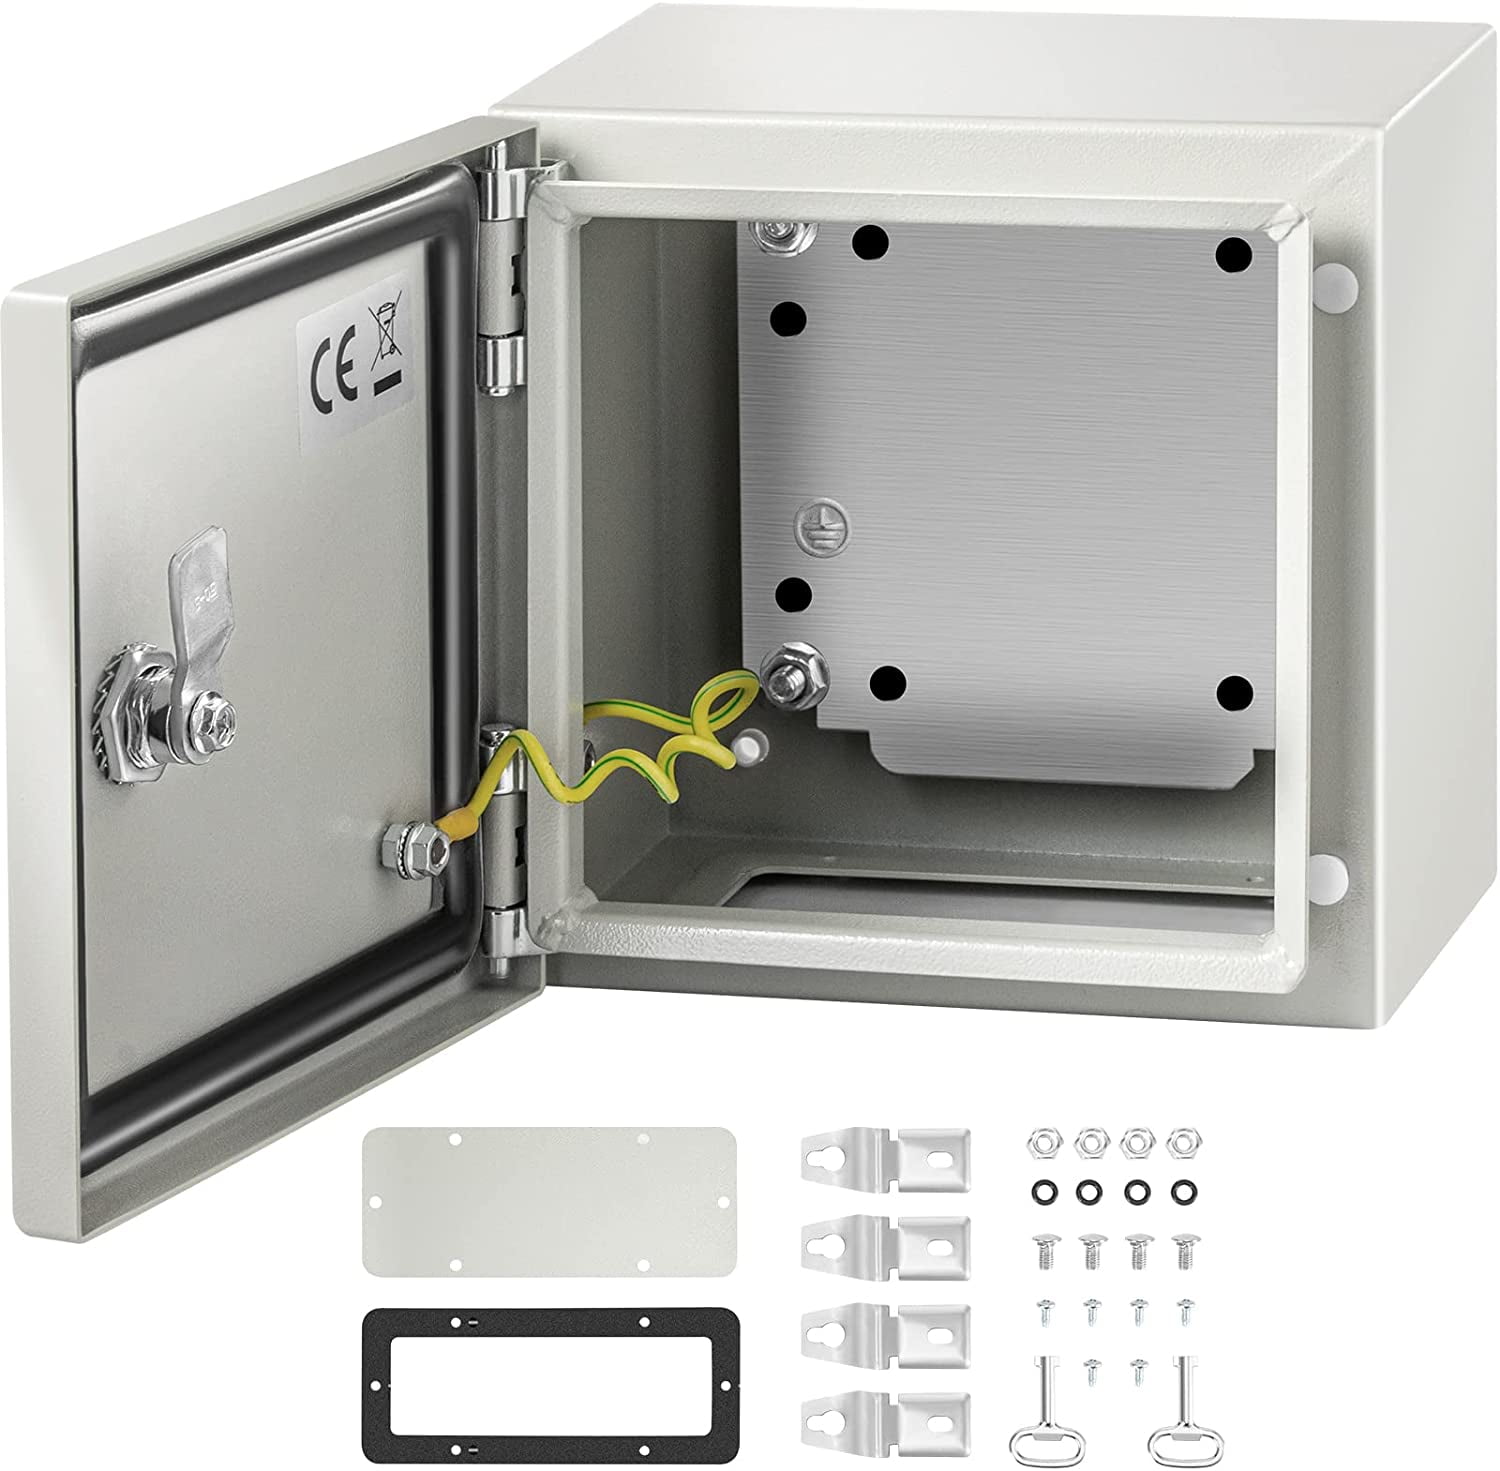 290mm x 210mm x 60mm ABS Clear Cover Dustproof IP65 Electrical Junction Box 